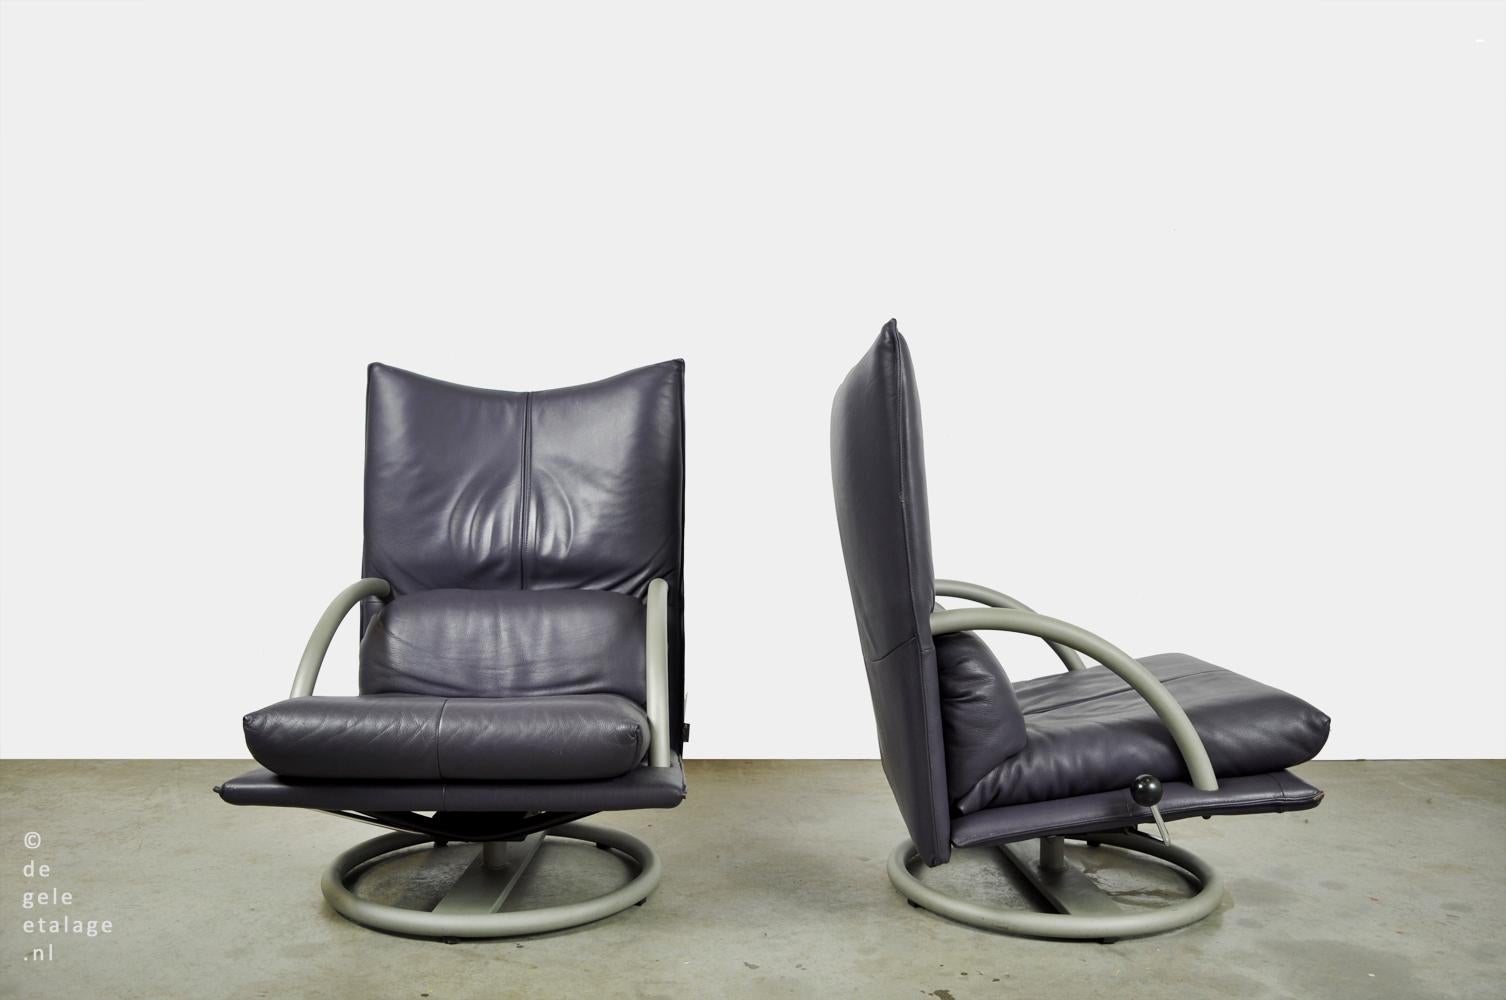 luxurious leather lounge armchairs in a special color, model 418 Torino BMP, designed and produced by Rolf Benz, Germany 1980. The armchairs stand on a matt gray coated steel frame that can rotate 360 degrees and have an adjustable backrest. The